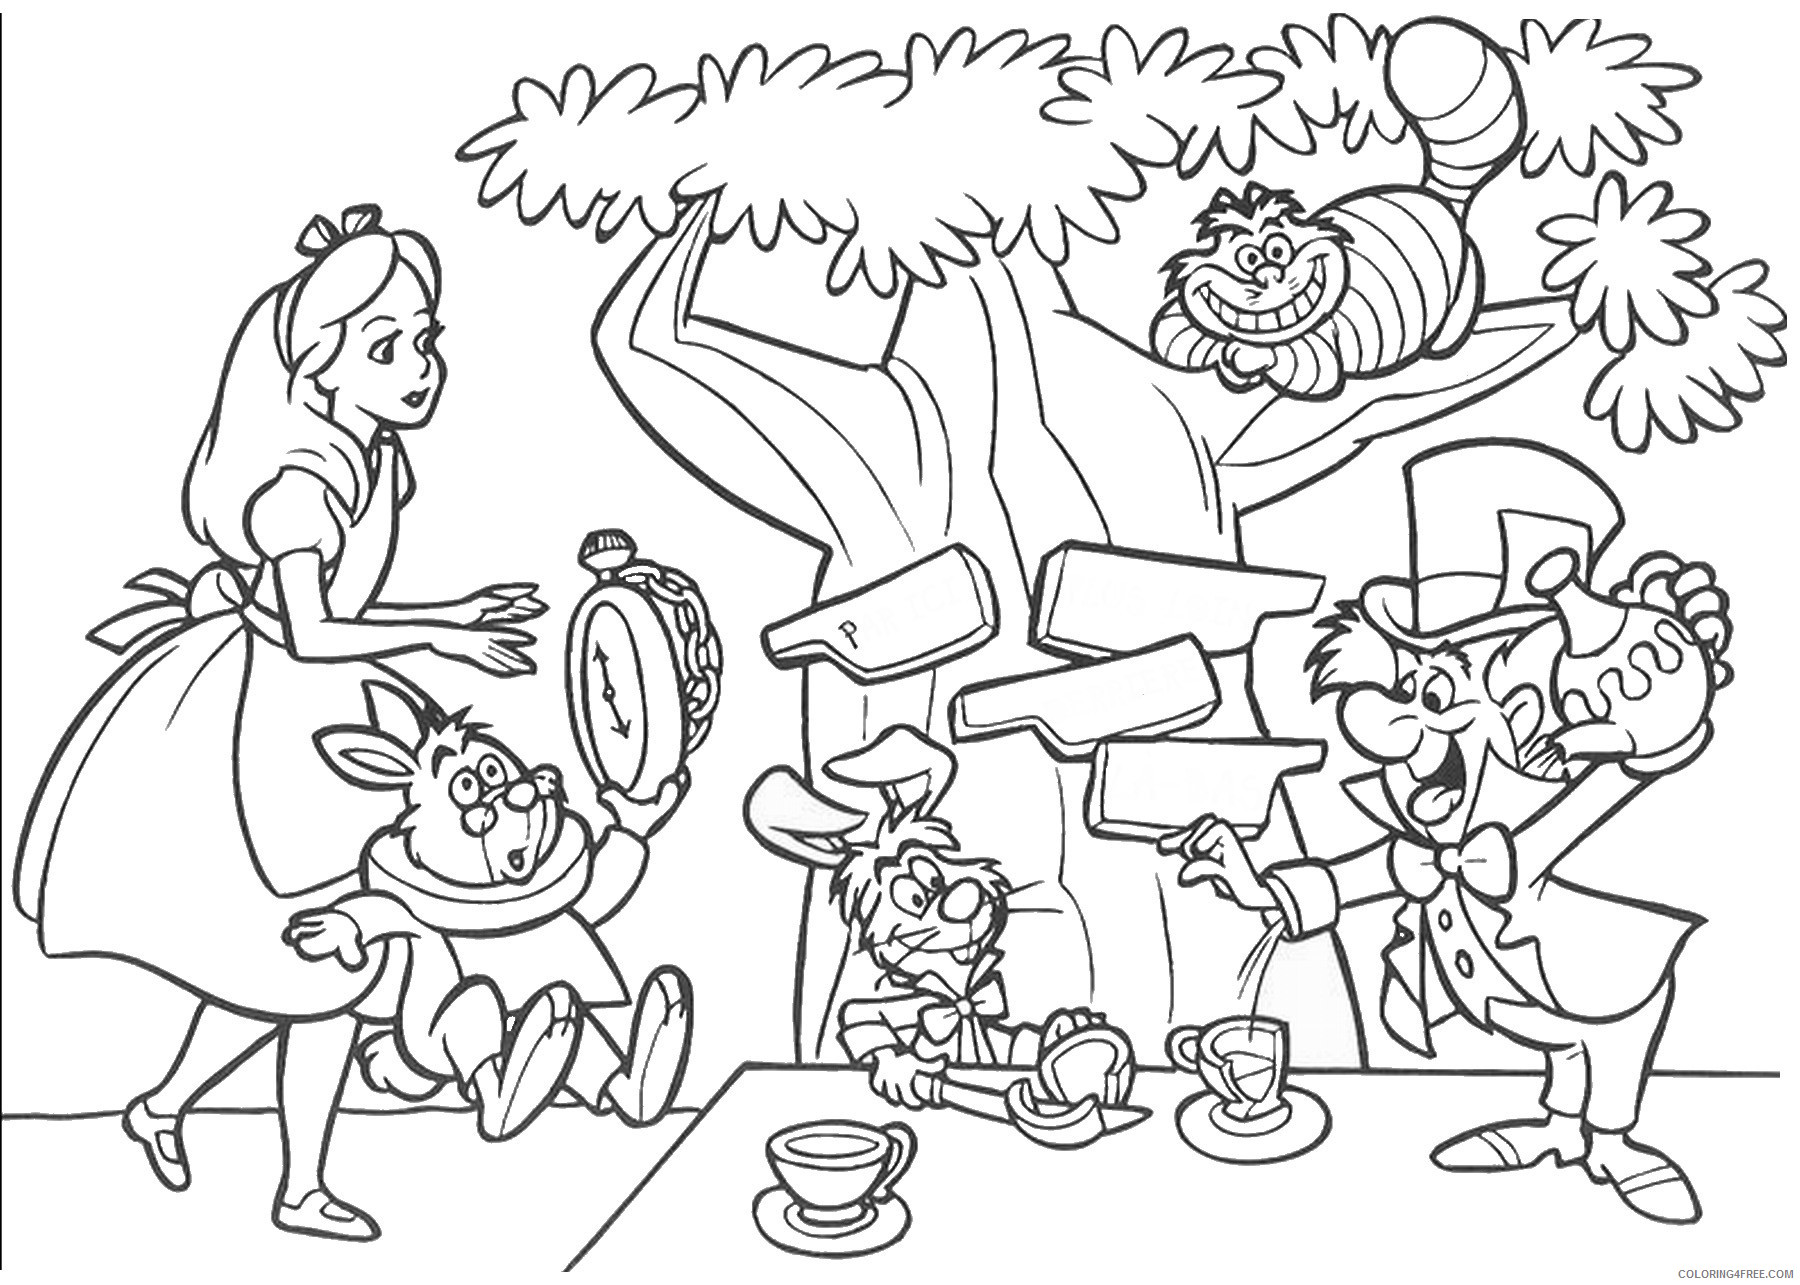 Alice in Wonderland Coloring Pages Cartoons alice_08 Printable 2020 0349 Coloring4free